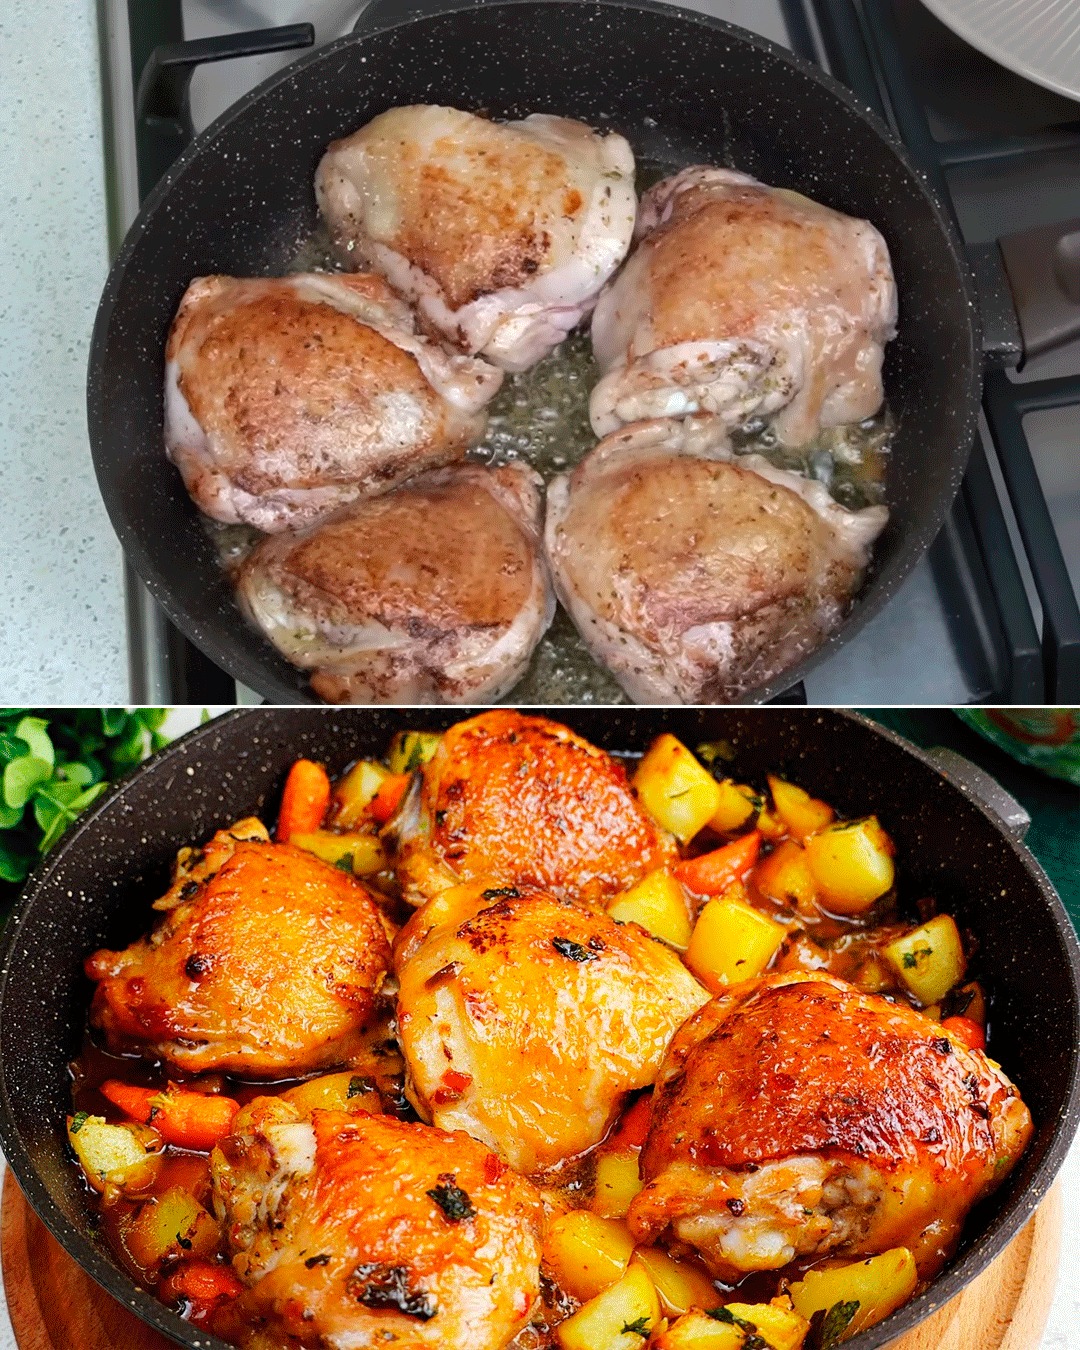 CHICKEN STEW WITH POTATOES AND VEGETABLES